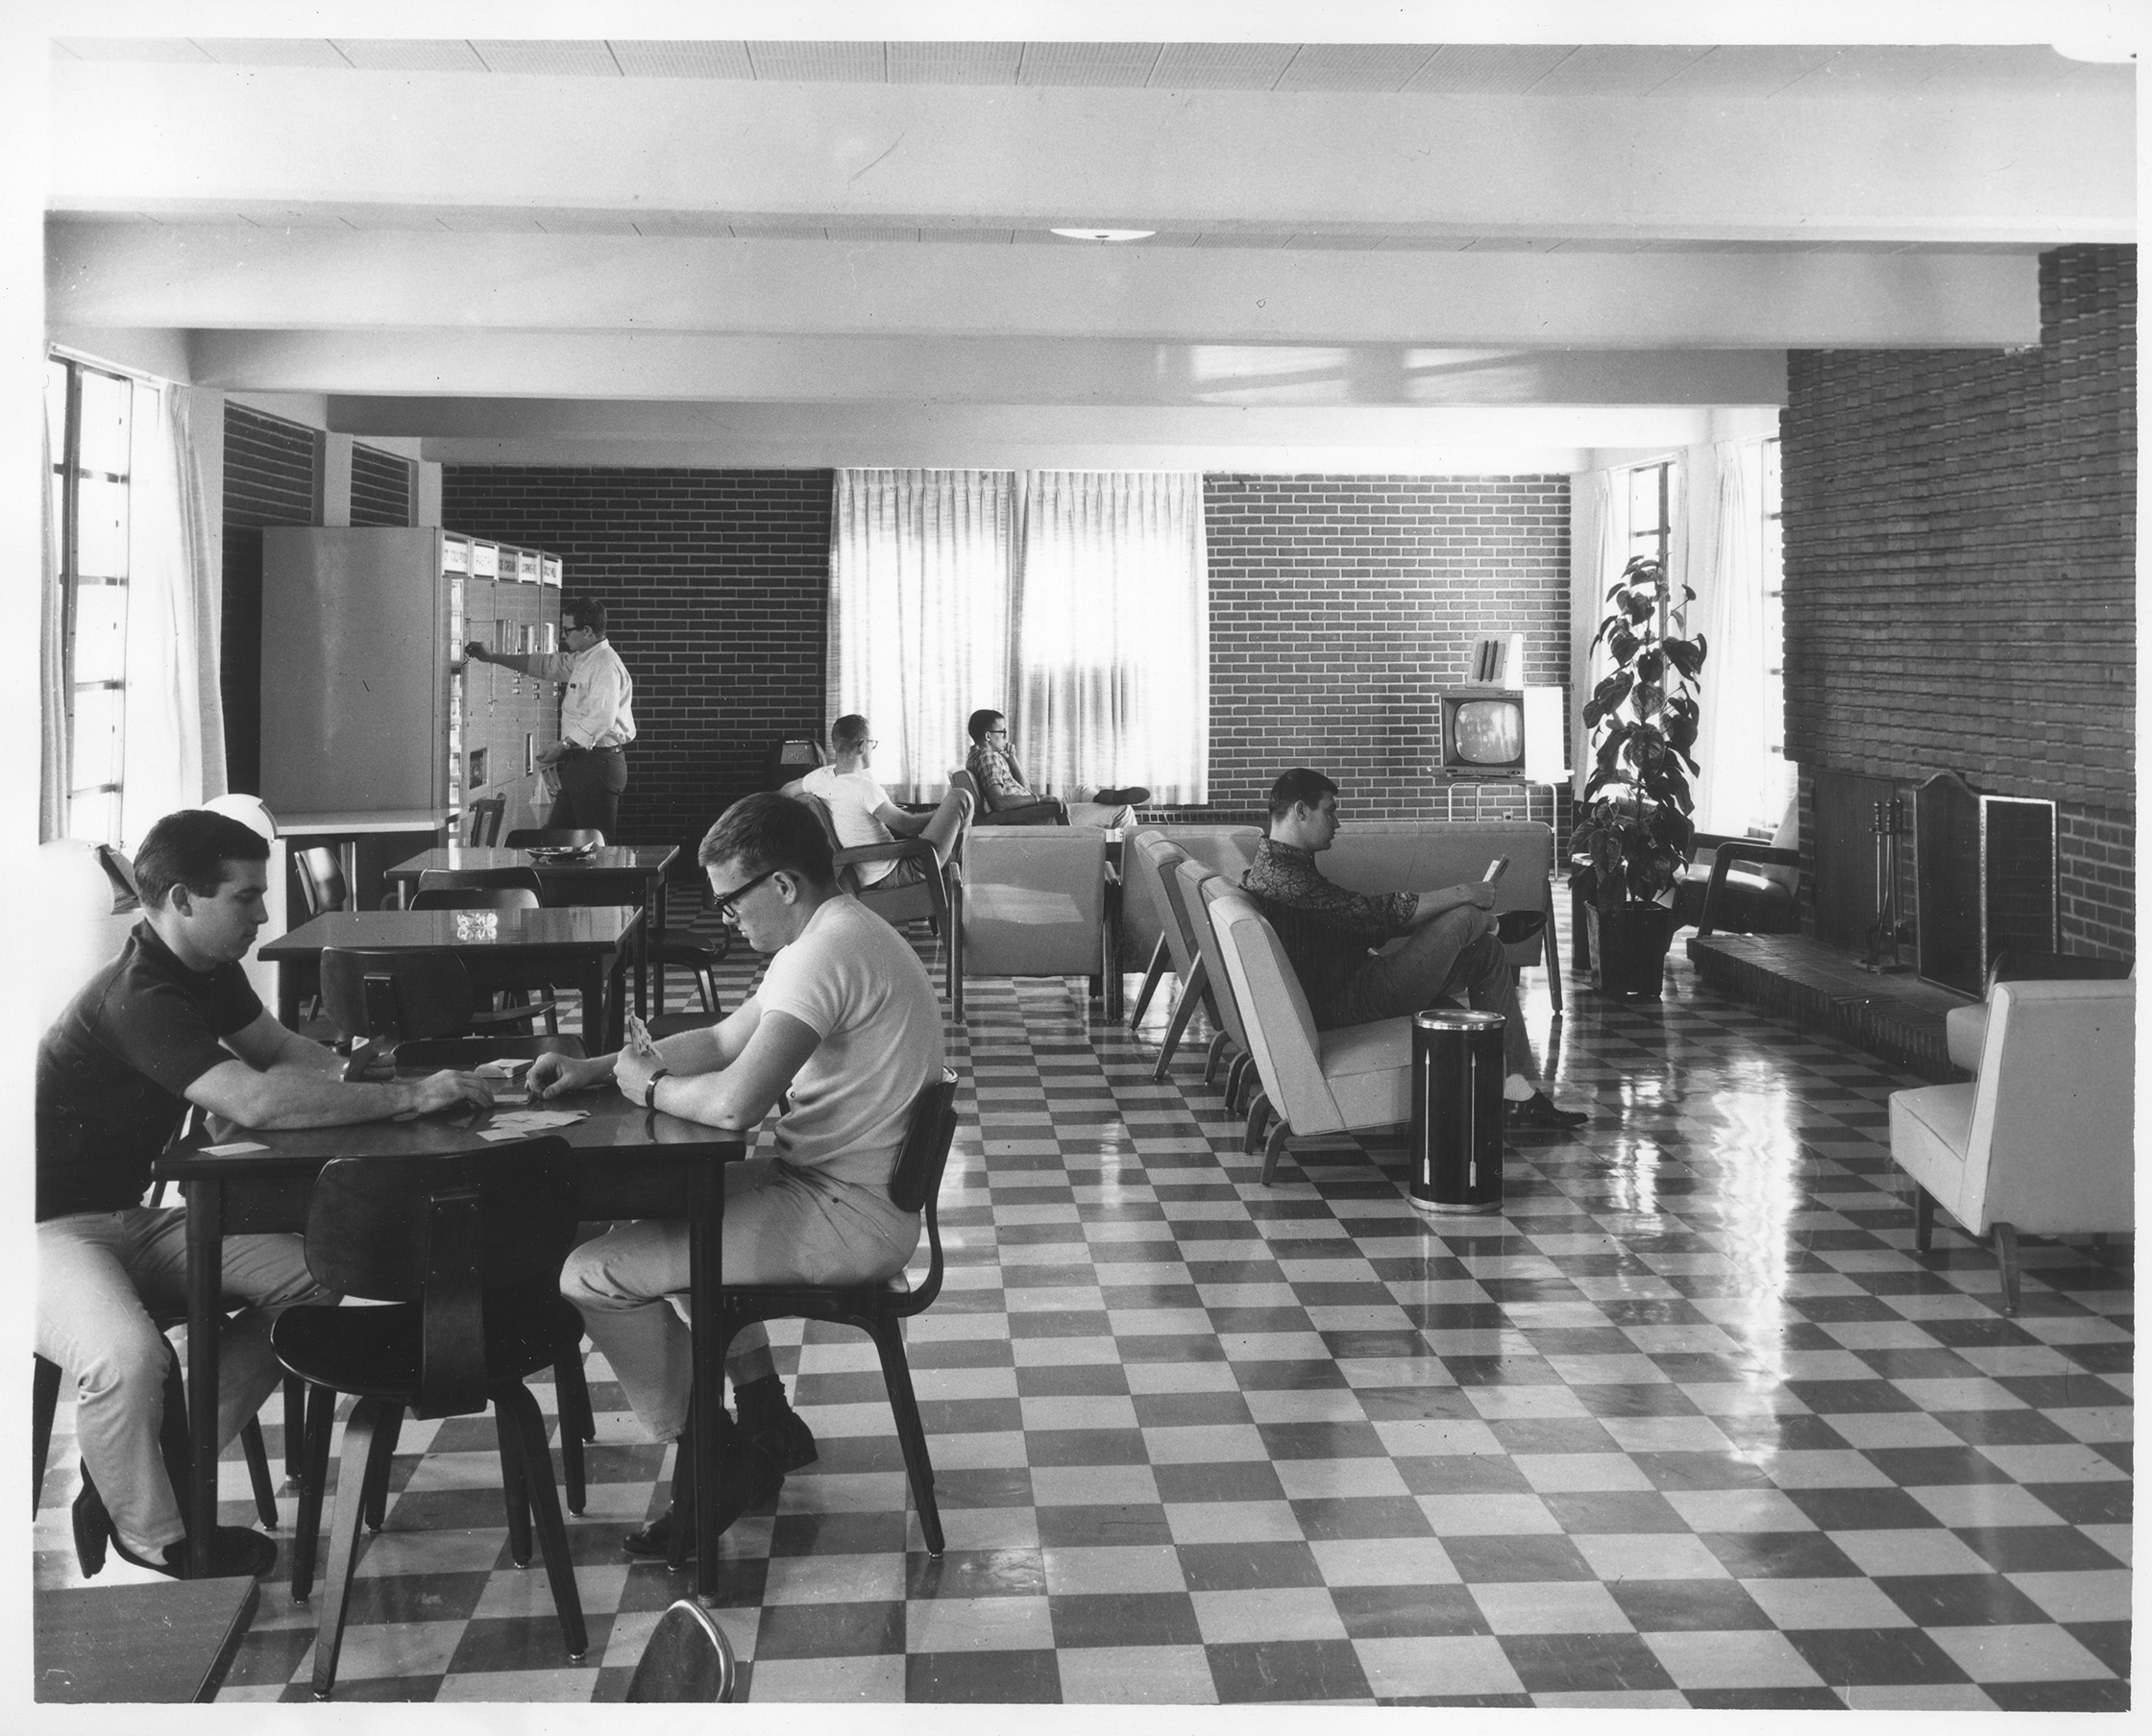 Building interior with students at tables and on couches. The walls are made of brick and there is a checkerboard-patterned floor.